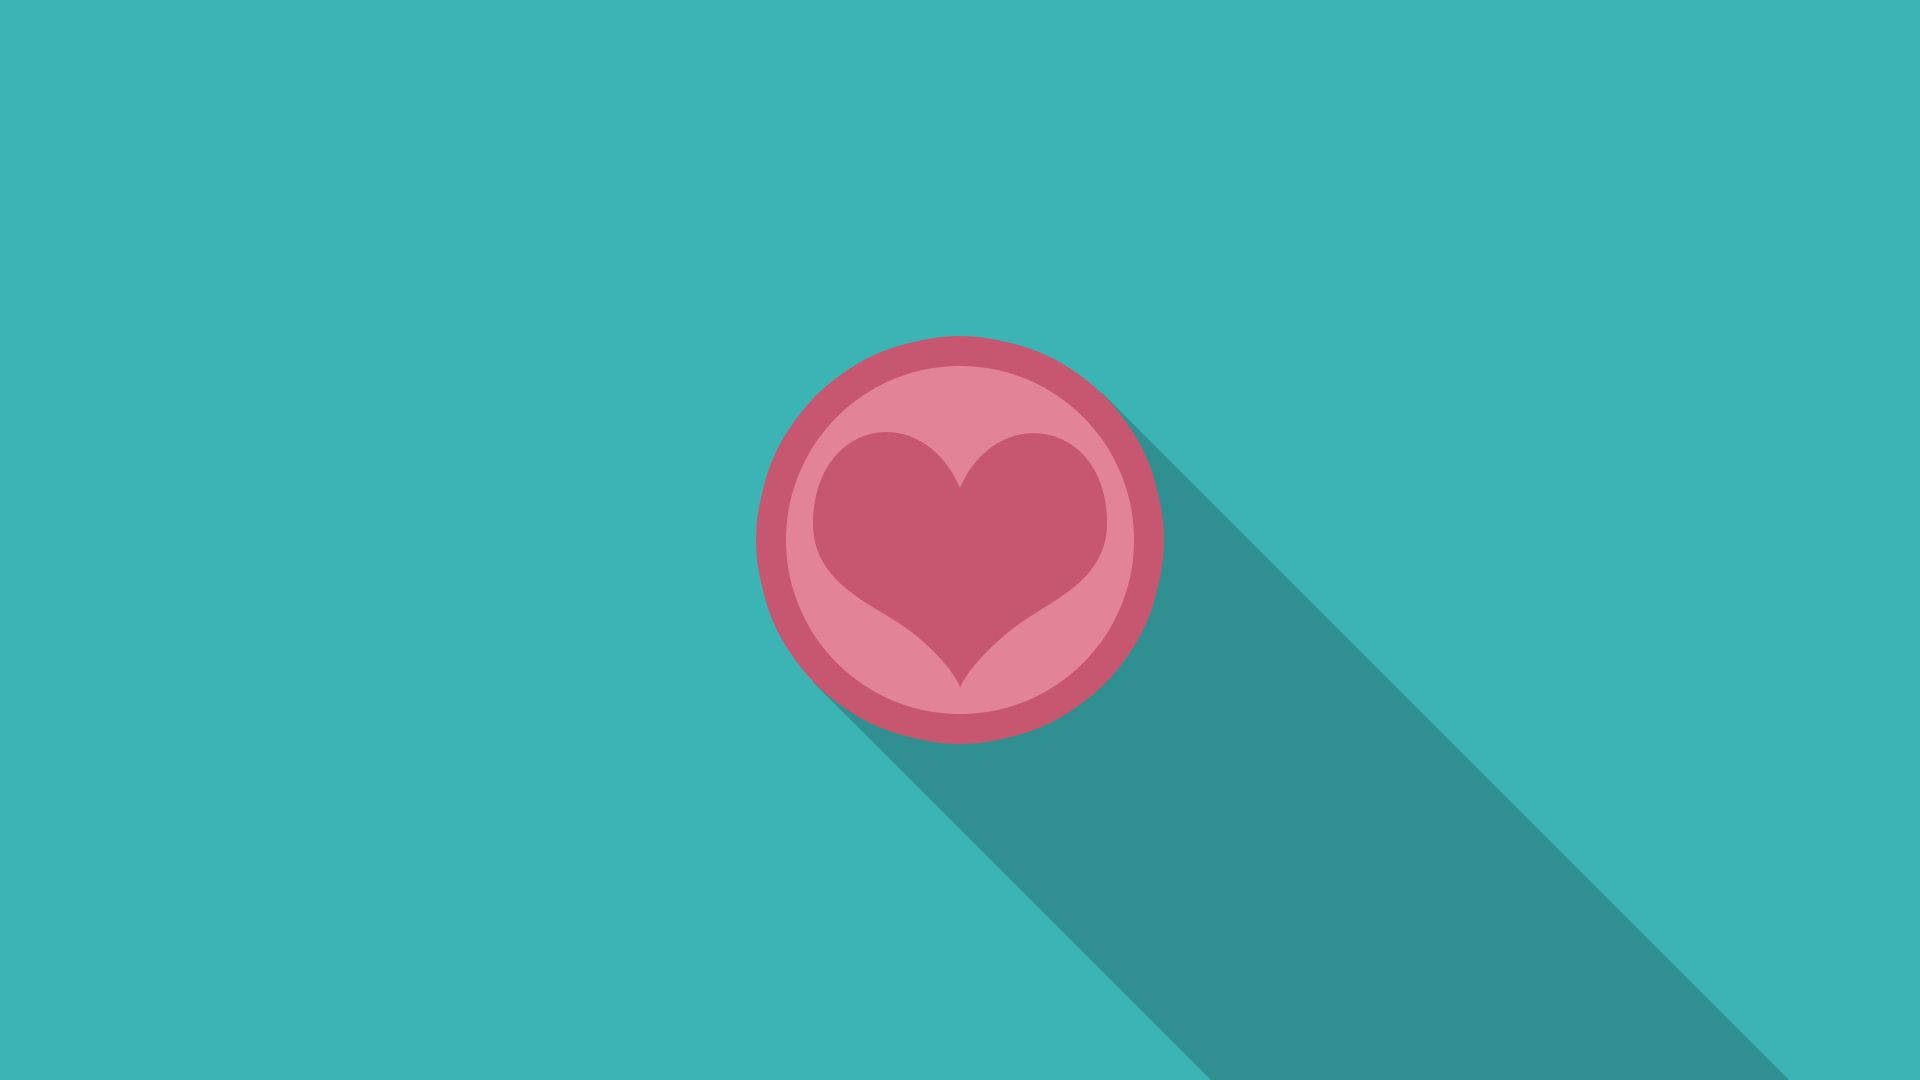 Pink Heart Vector On Minimalist Blue Surface Background